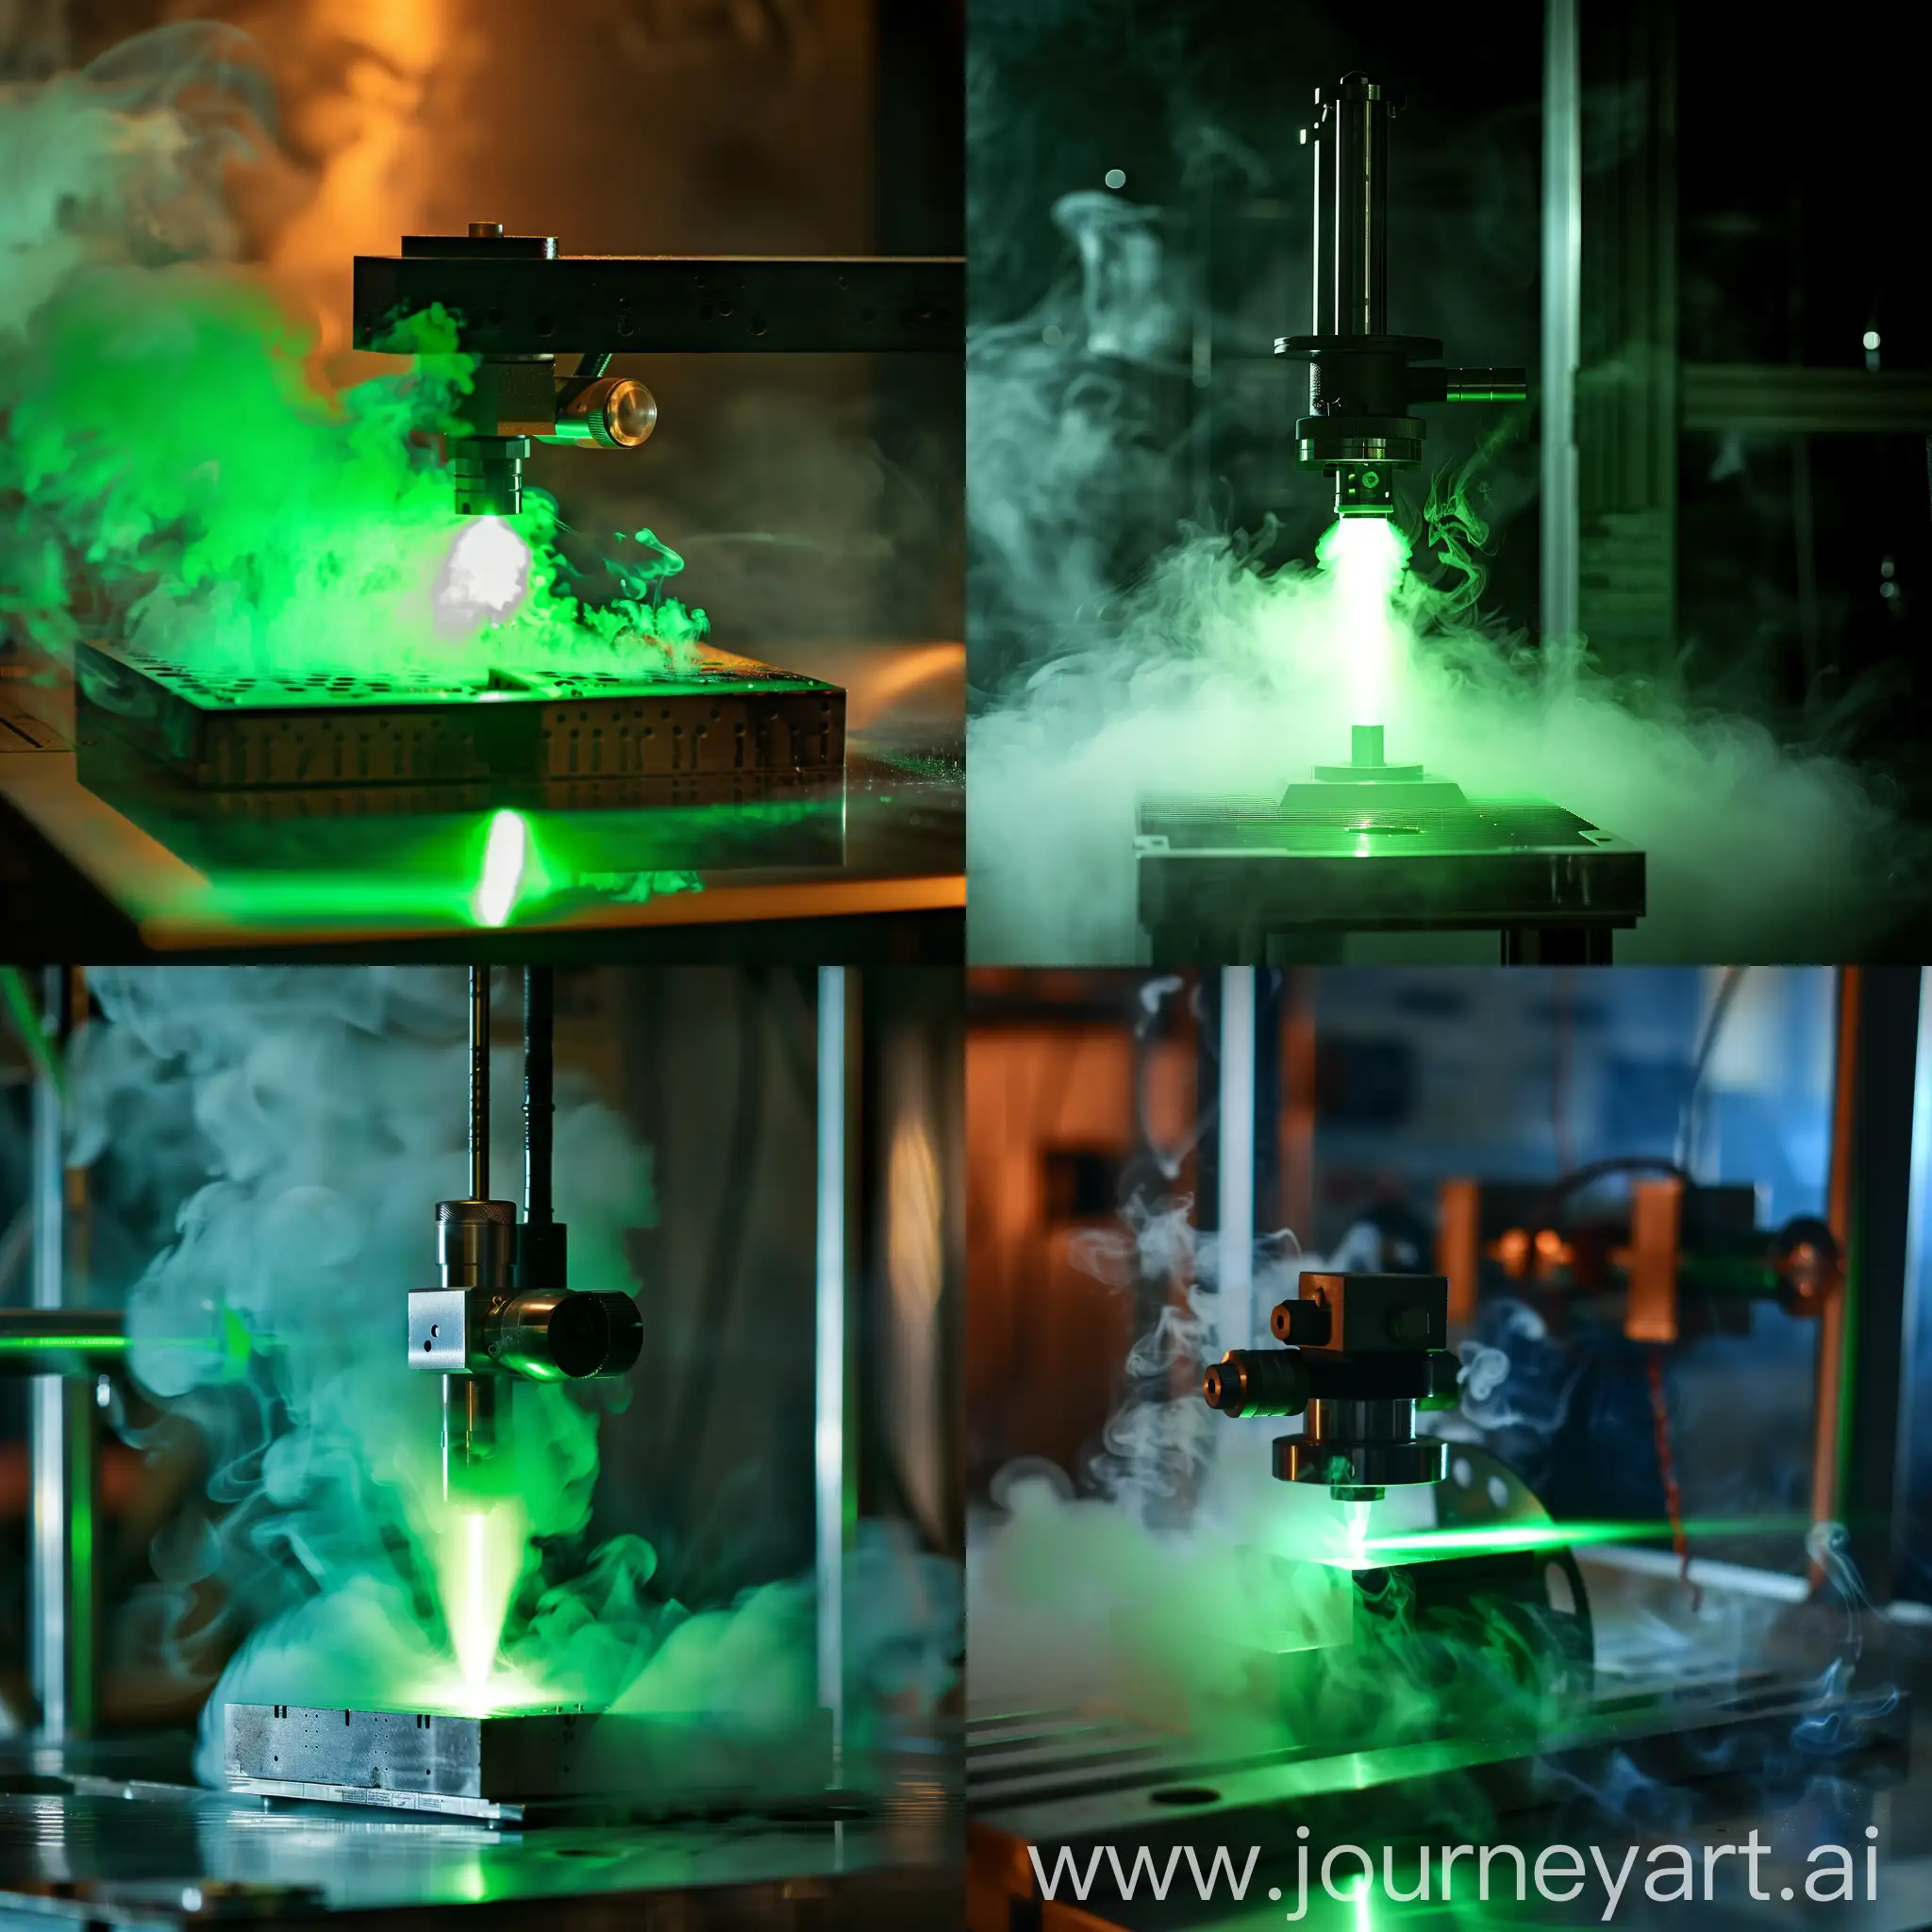 a laser in the laboratory with a green beam shines on a metal device that is smoking